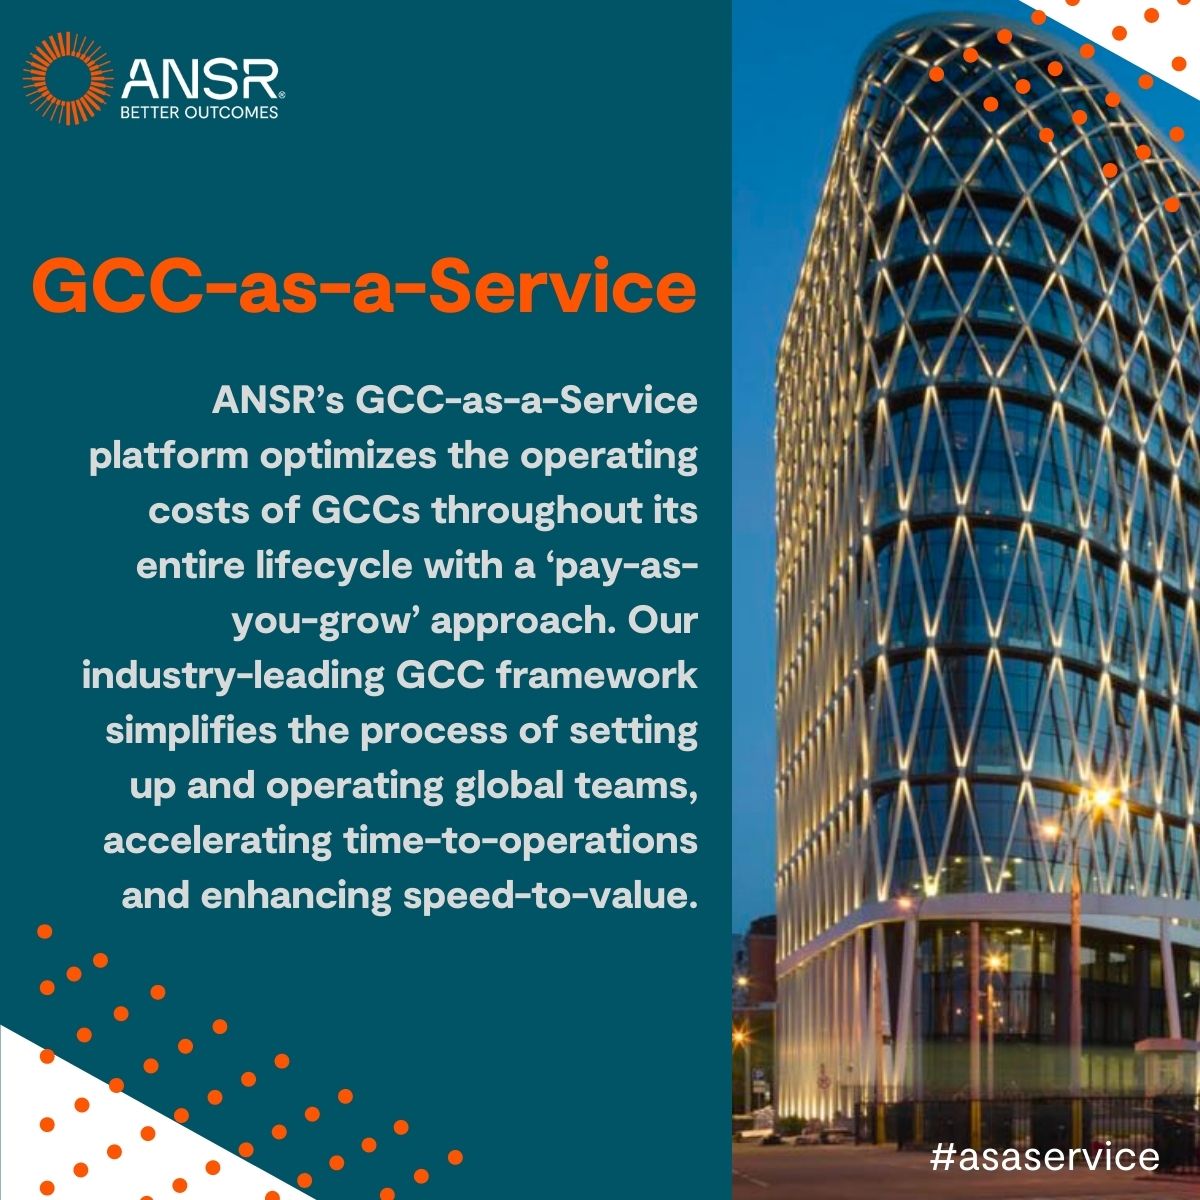 ANSR’s proprietary GCC Playbook and design expertise represent over 15 years of successfully establishing and managing world class capability centers. Talk to us today: ansr.com/contact

#asaservice #globalteams